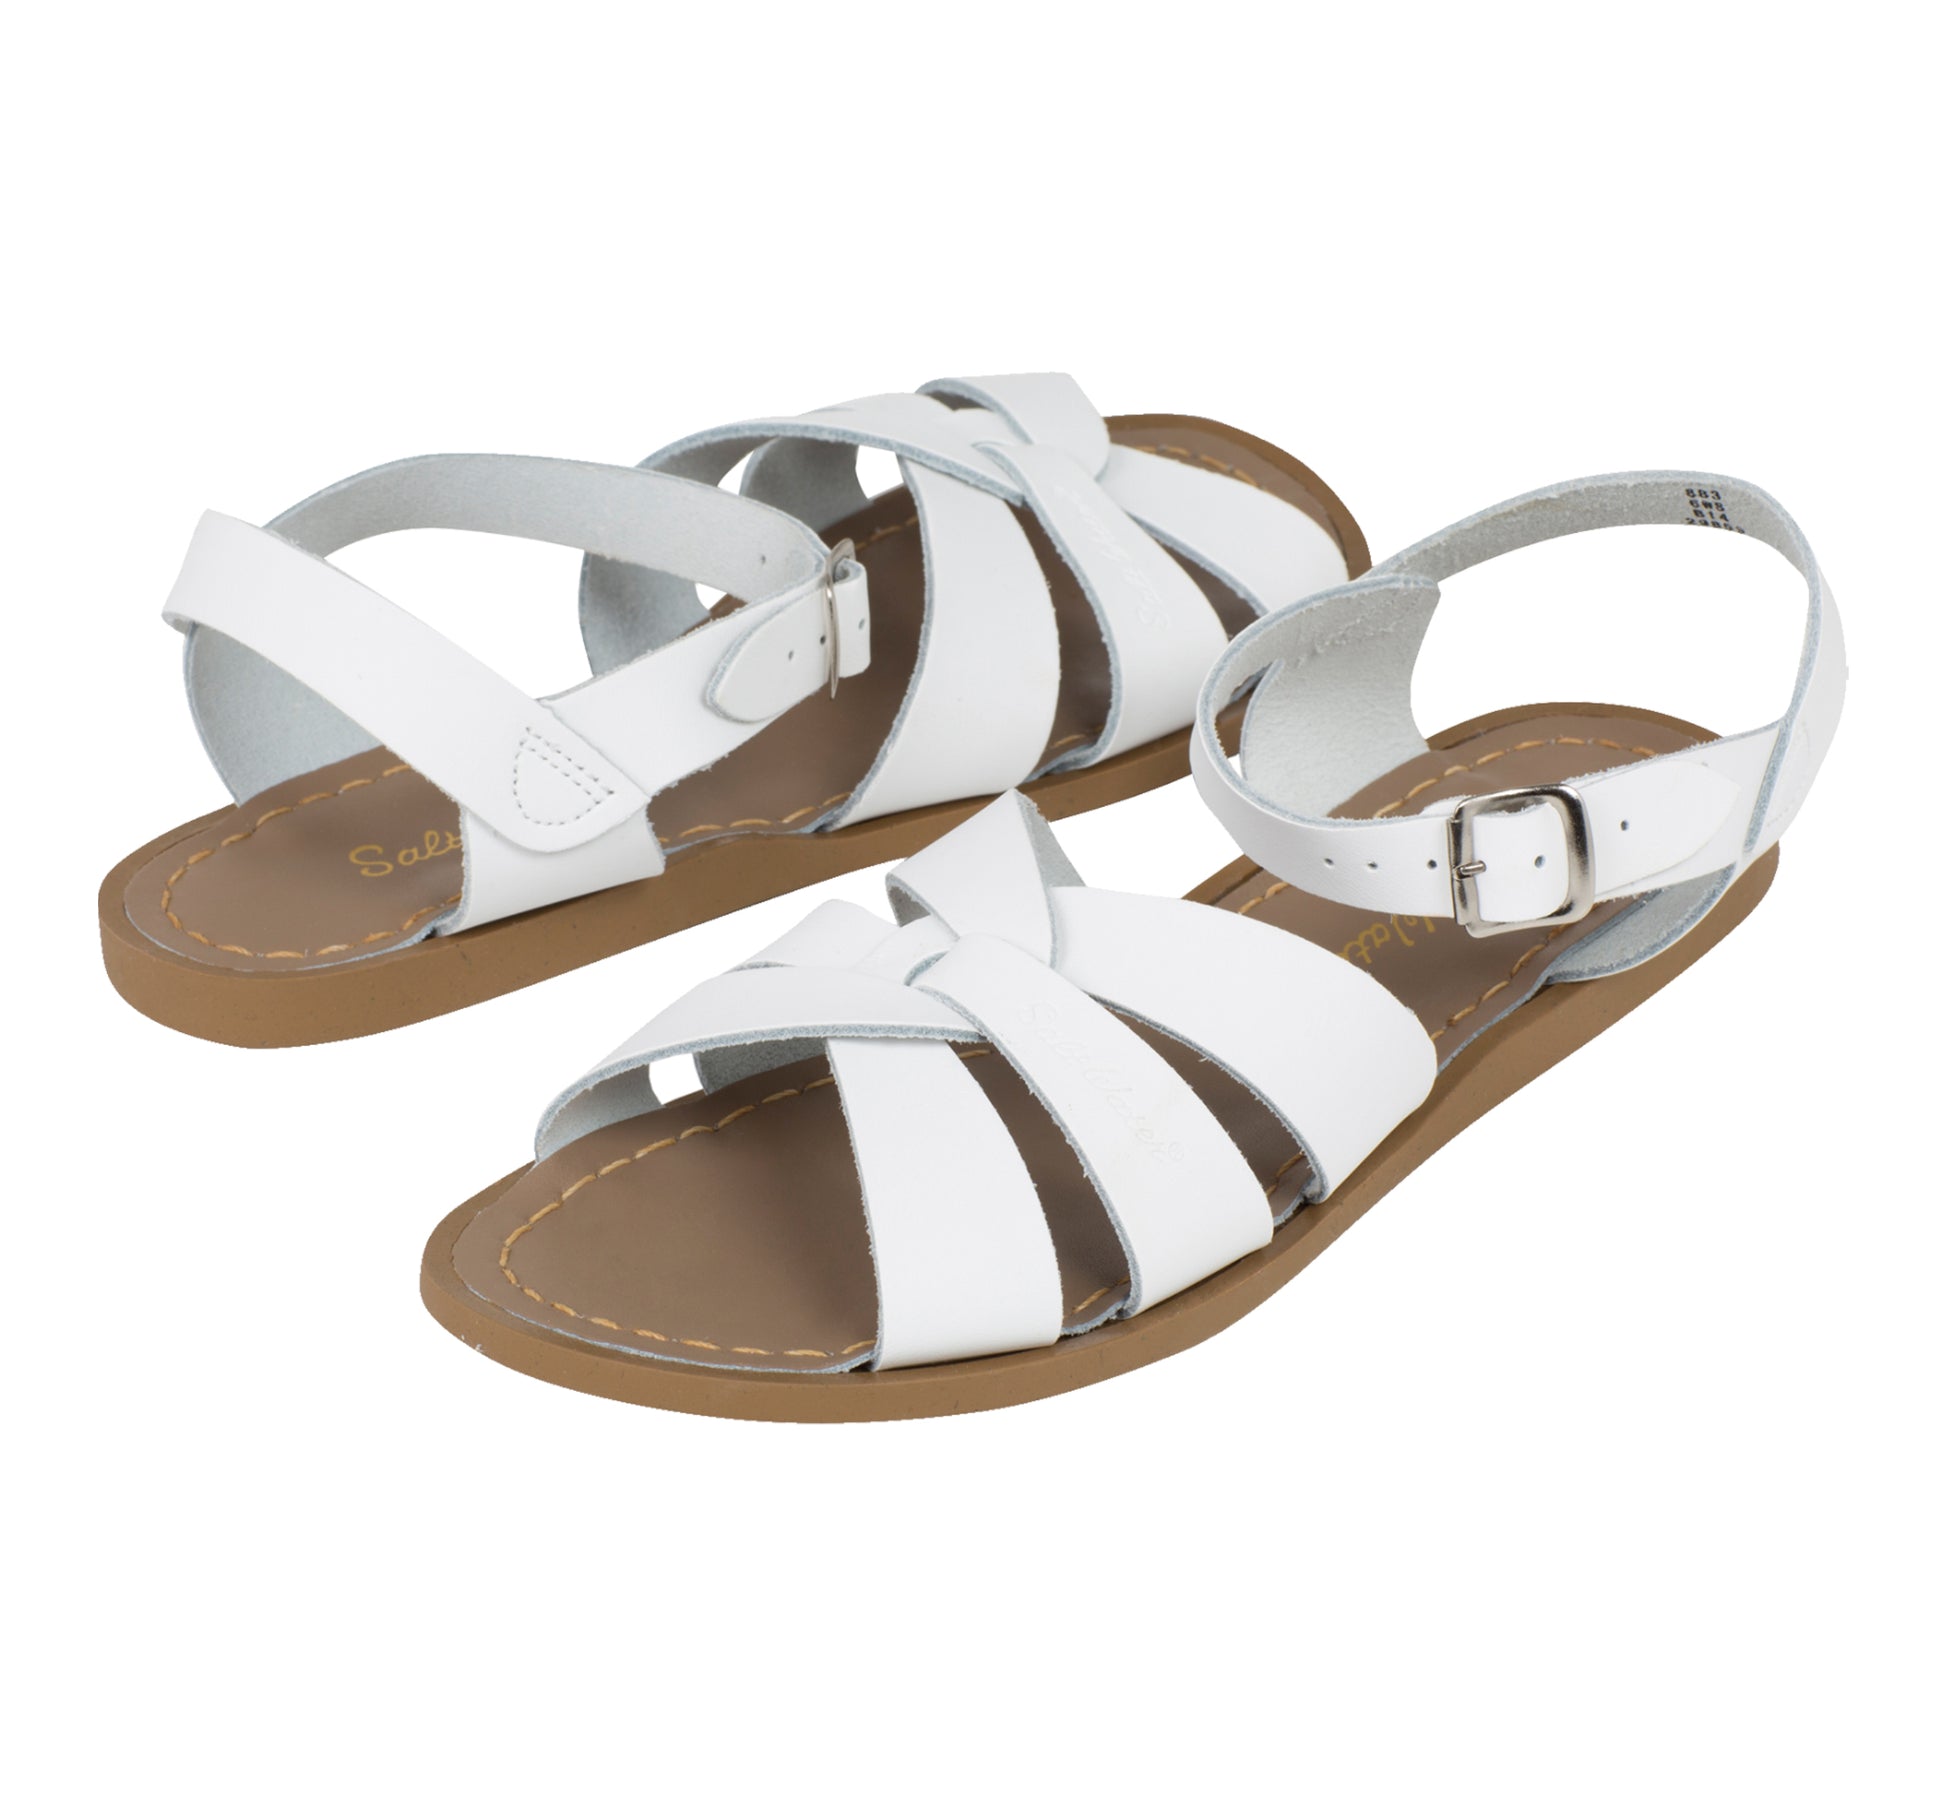 An original girls sandal by Salt Water Sandals in white with single buckle fastening around the ankle. Open Toe and Sling-back with woven detail on the front. Pair view.